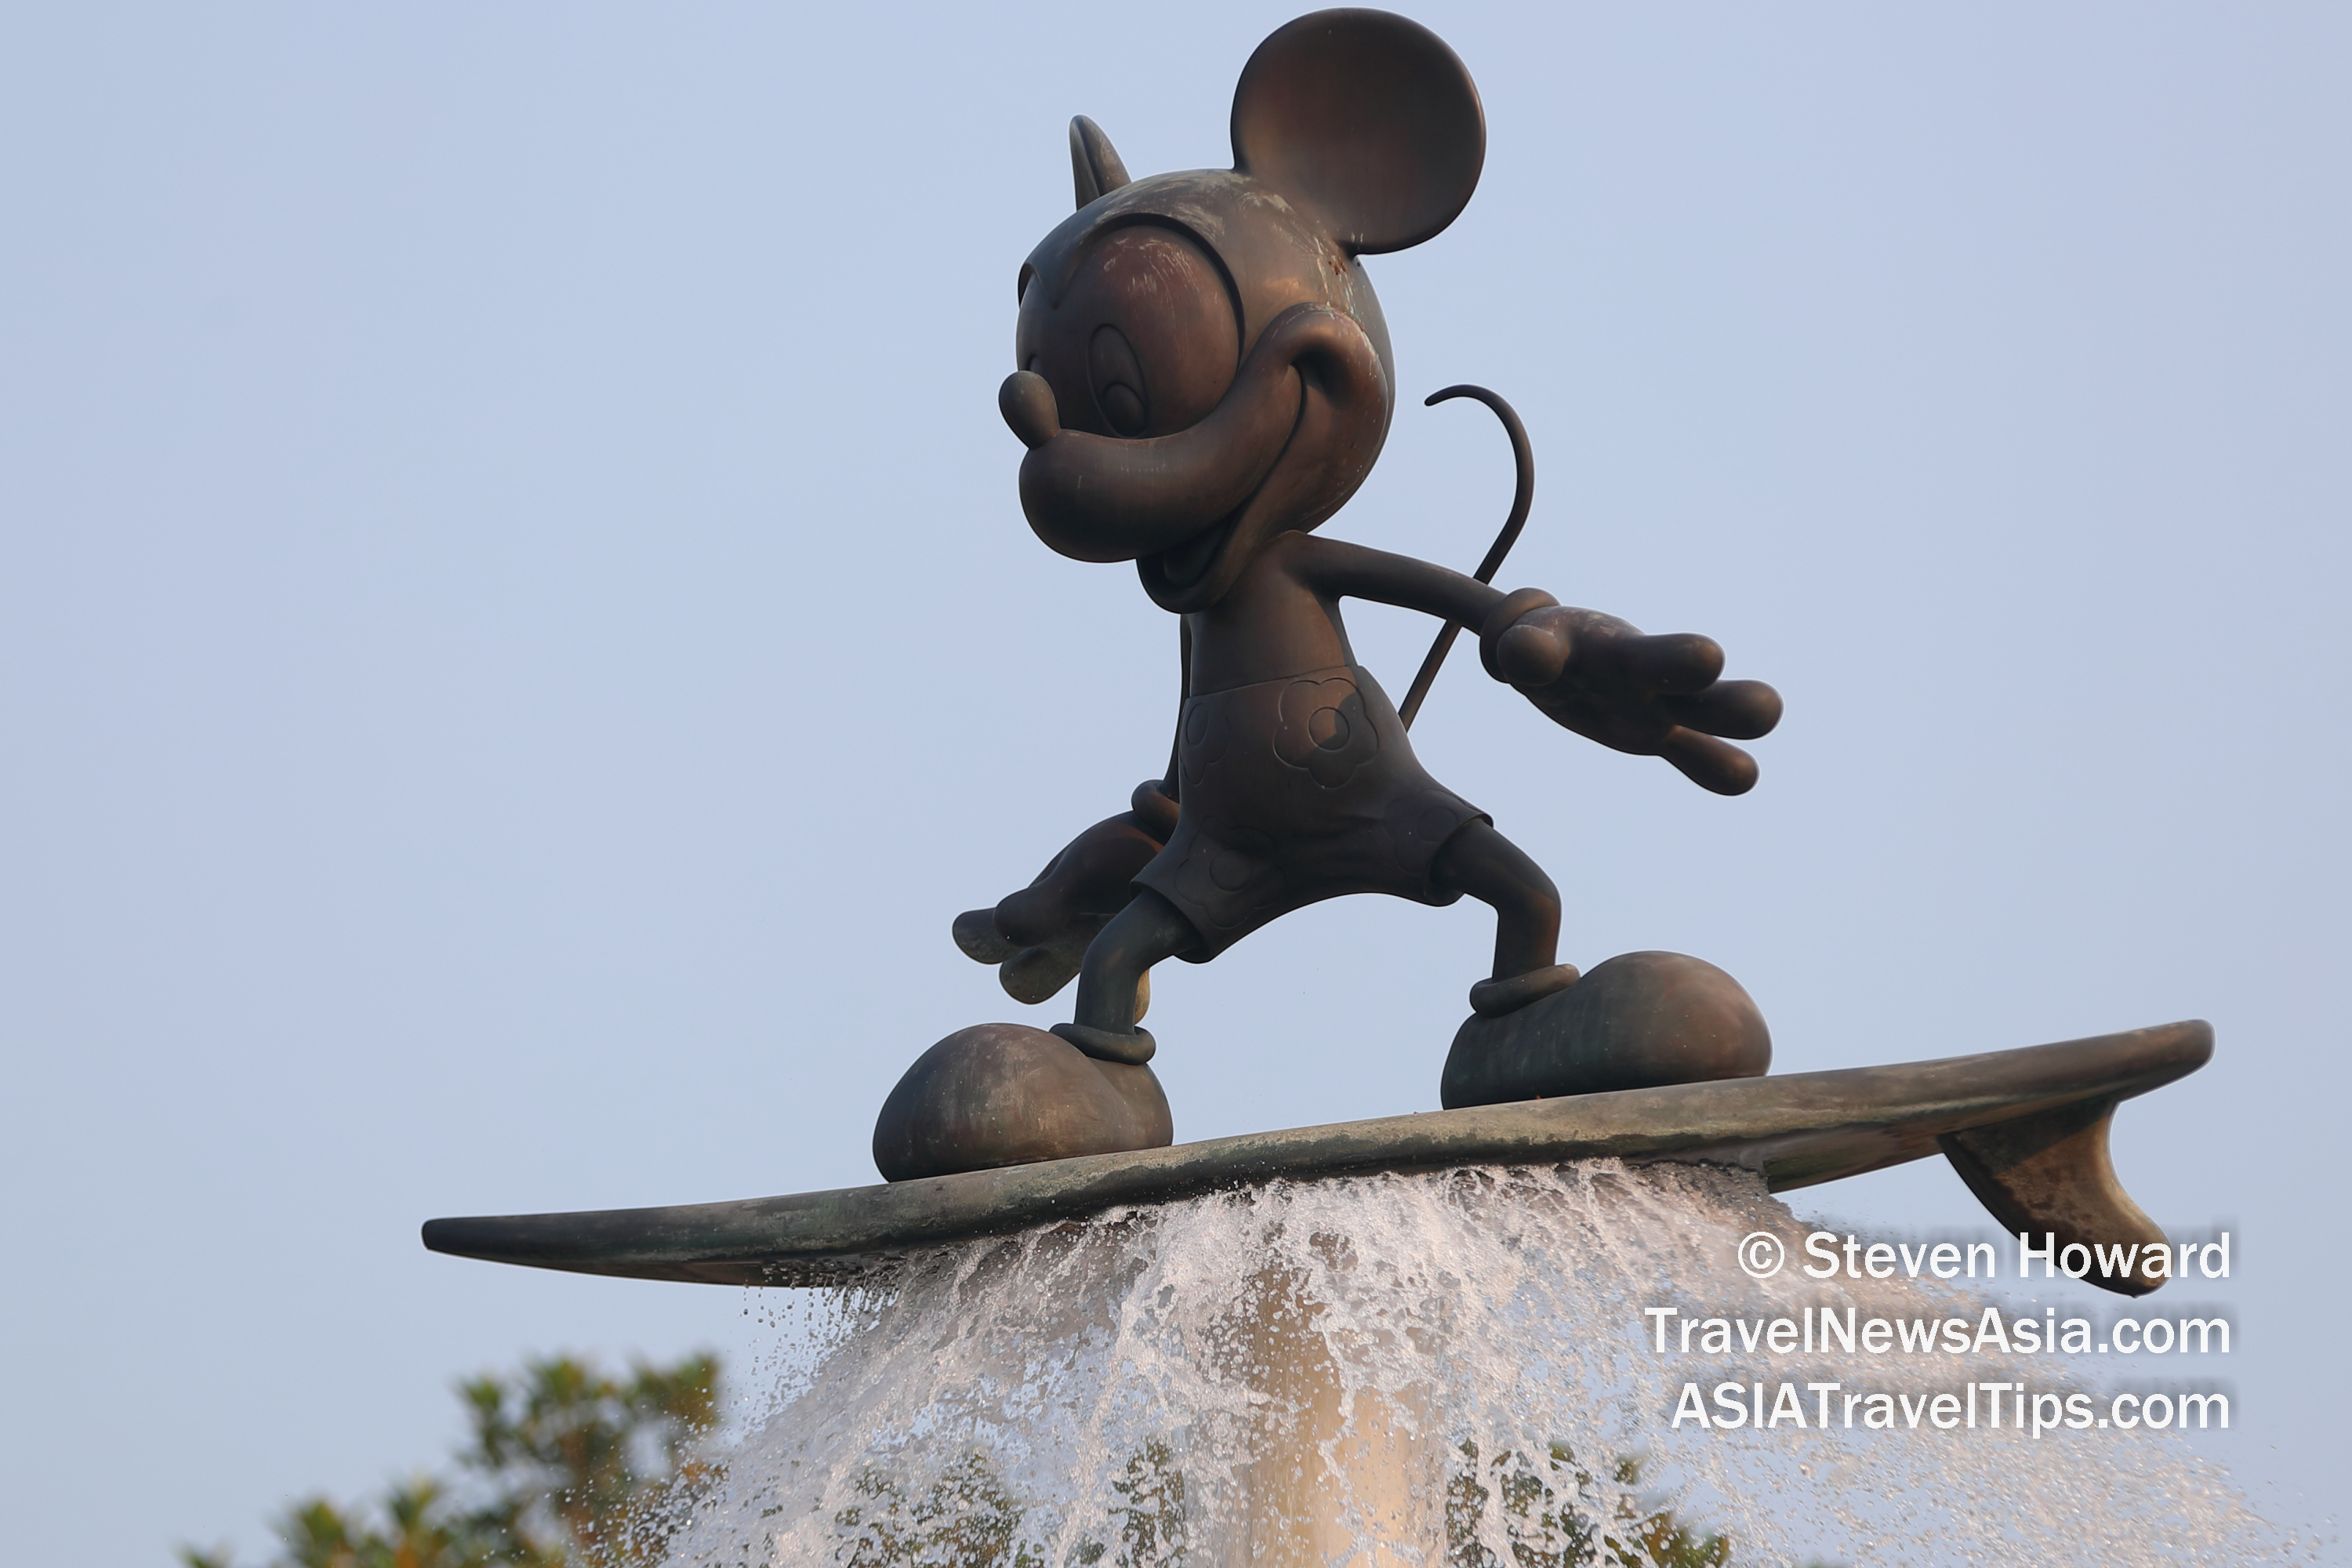 Mickey Mouse surfing at Hong Kong Disneyland. Picture by Steven Howard of TravelNewsAsia.com Click to enlarge.